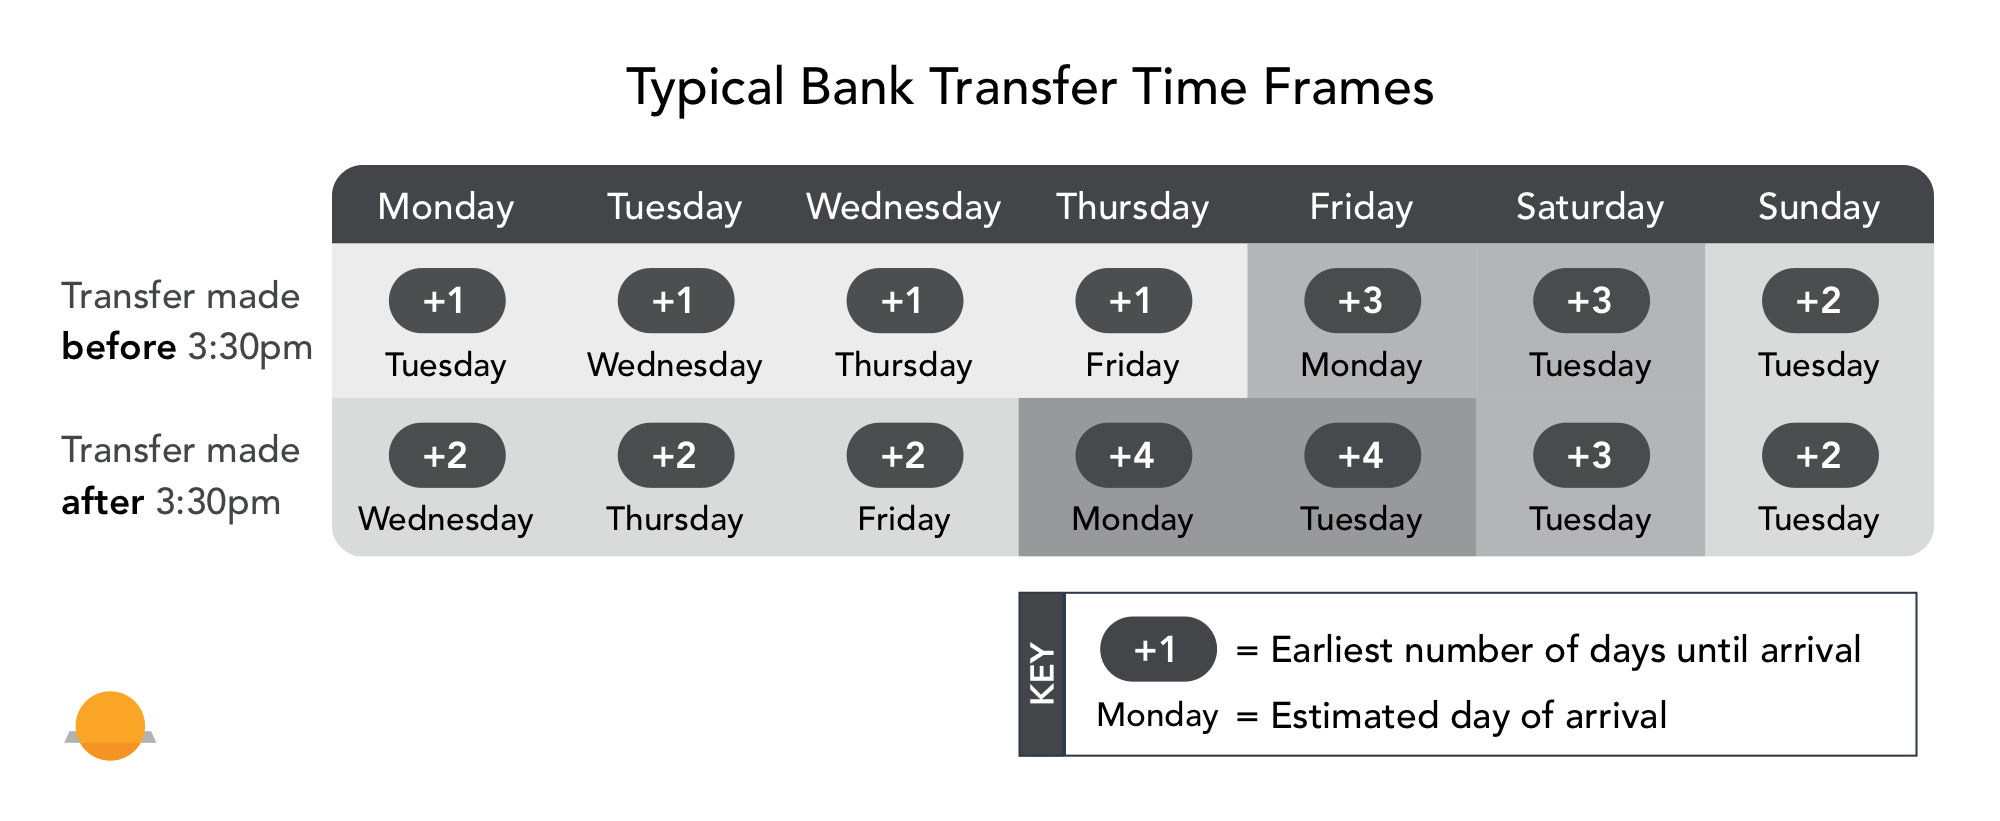 Typical_Bank_Transfer_Time_Frames_Graph_August_2018.png